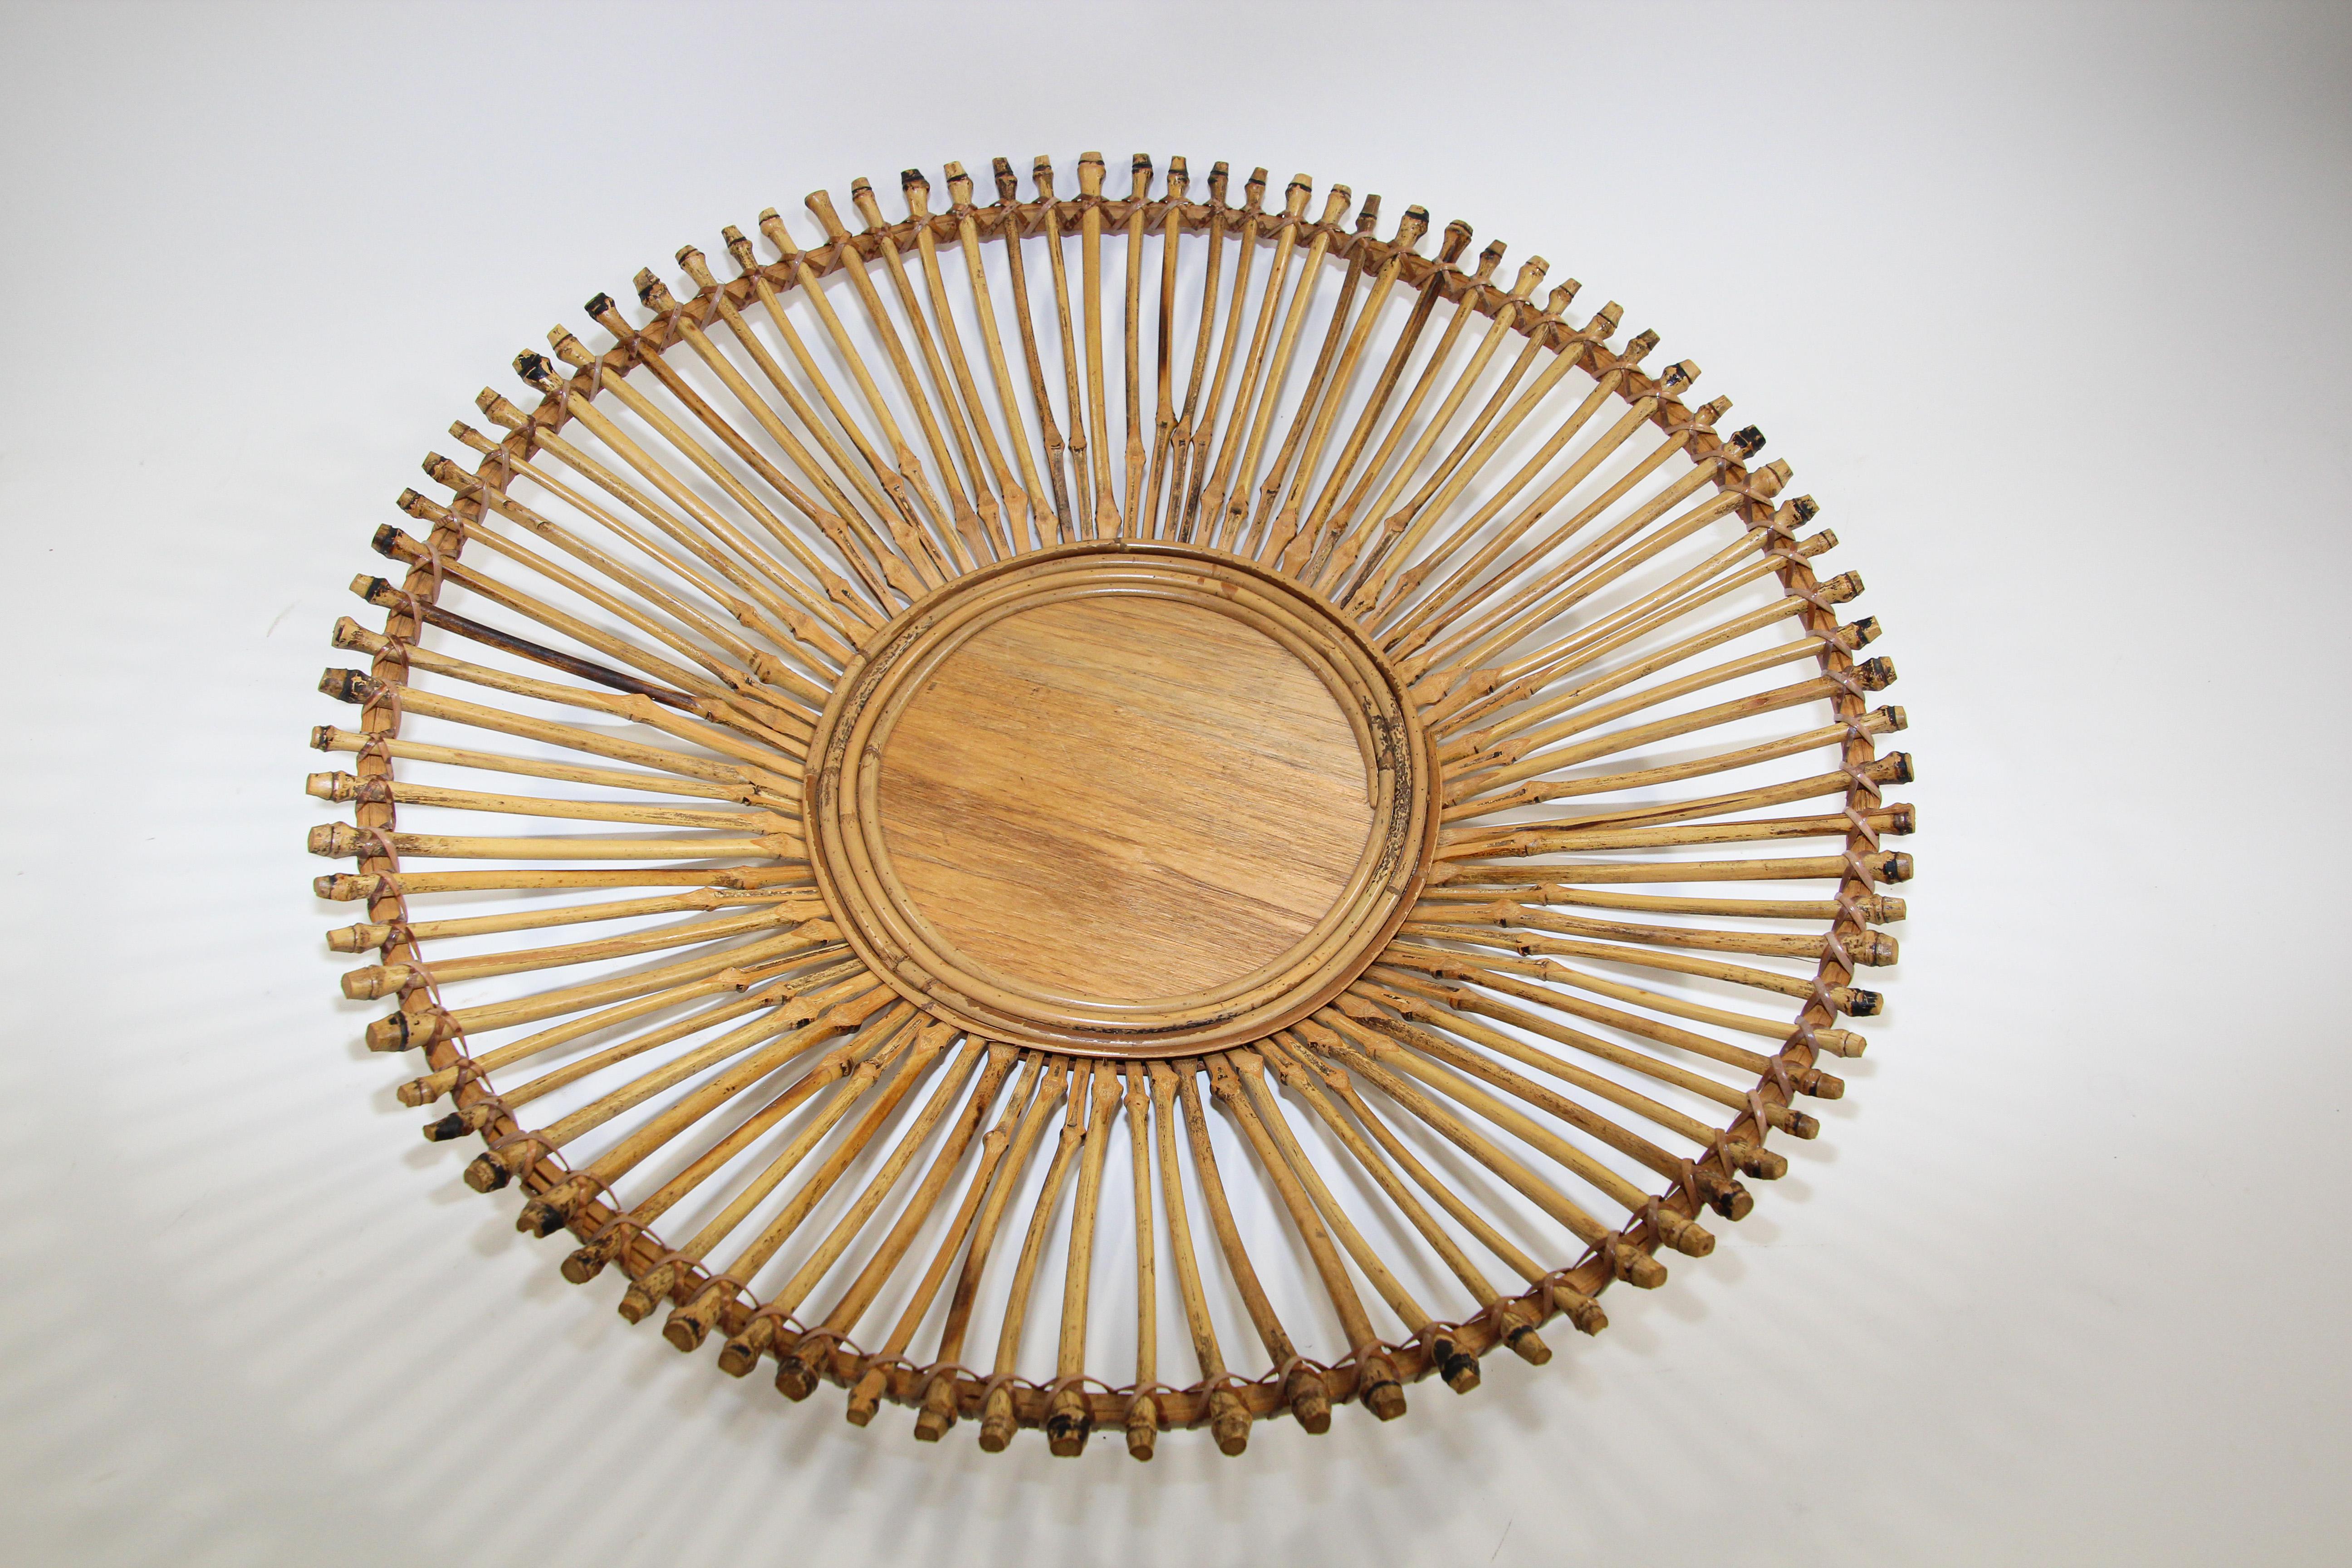 Large vintage Tribal handwoven bamboo ethnic round Asian basket.
Beautiful artisanal handwoven basket with tribal designs and patterns all around.
Large Asian rattan handcrafted decorative bowl.
Large vintage tribal handwoven bamboo ethnic round